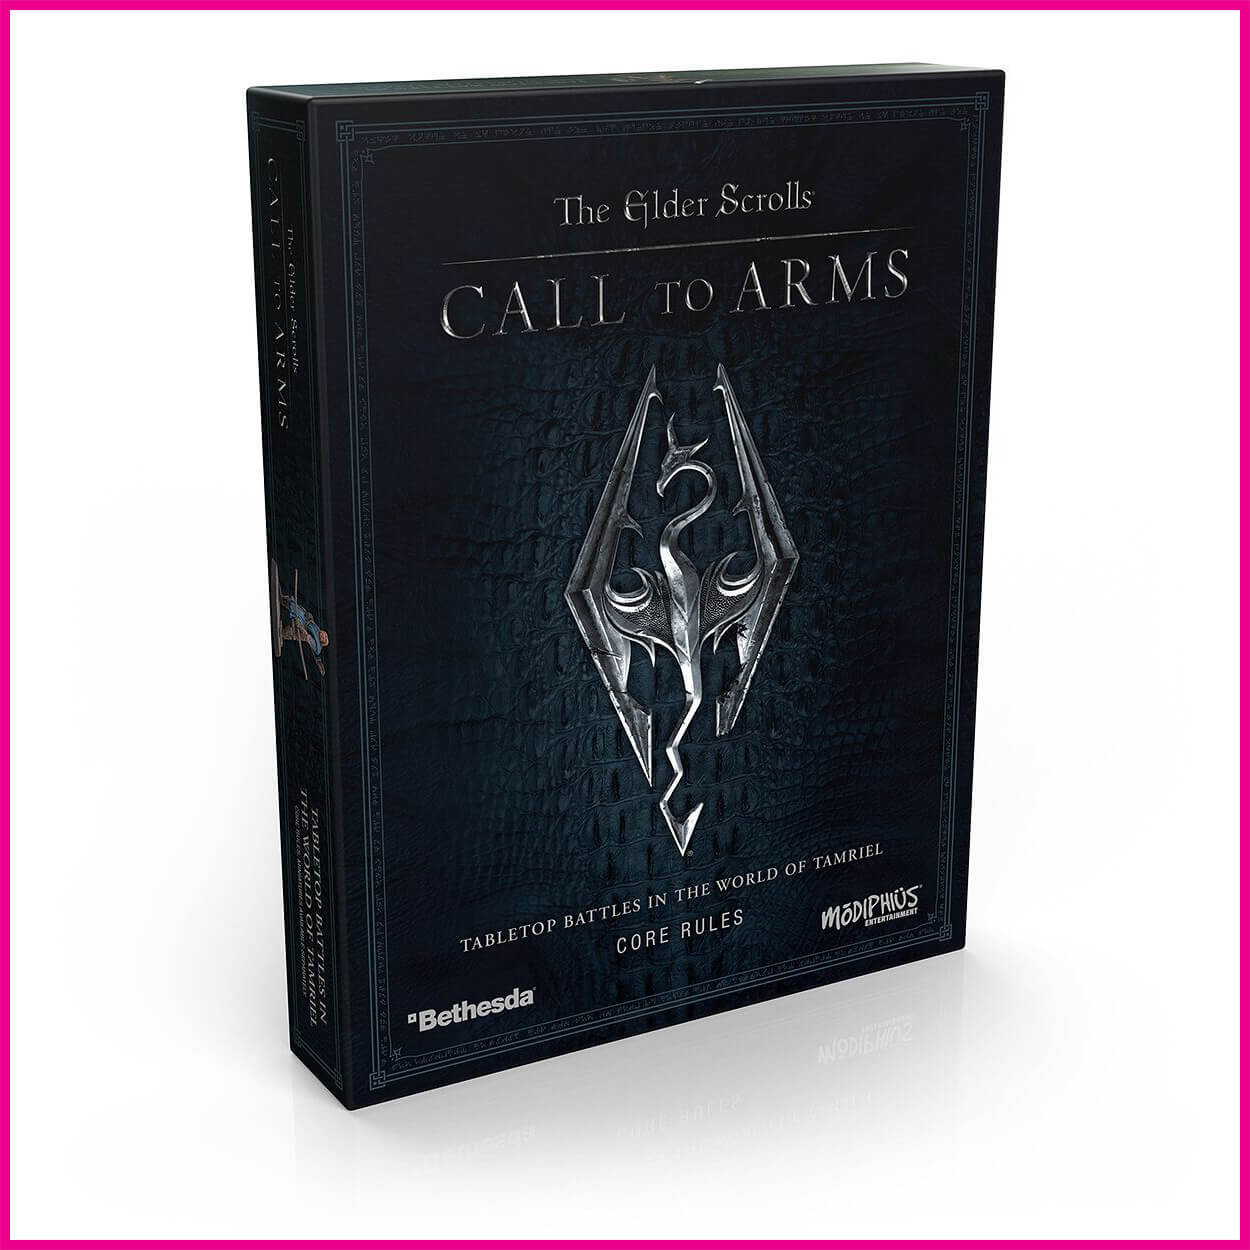 The Elder Scrolls: Call to Arms - Rules Box